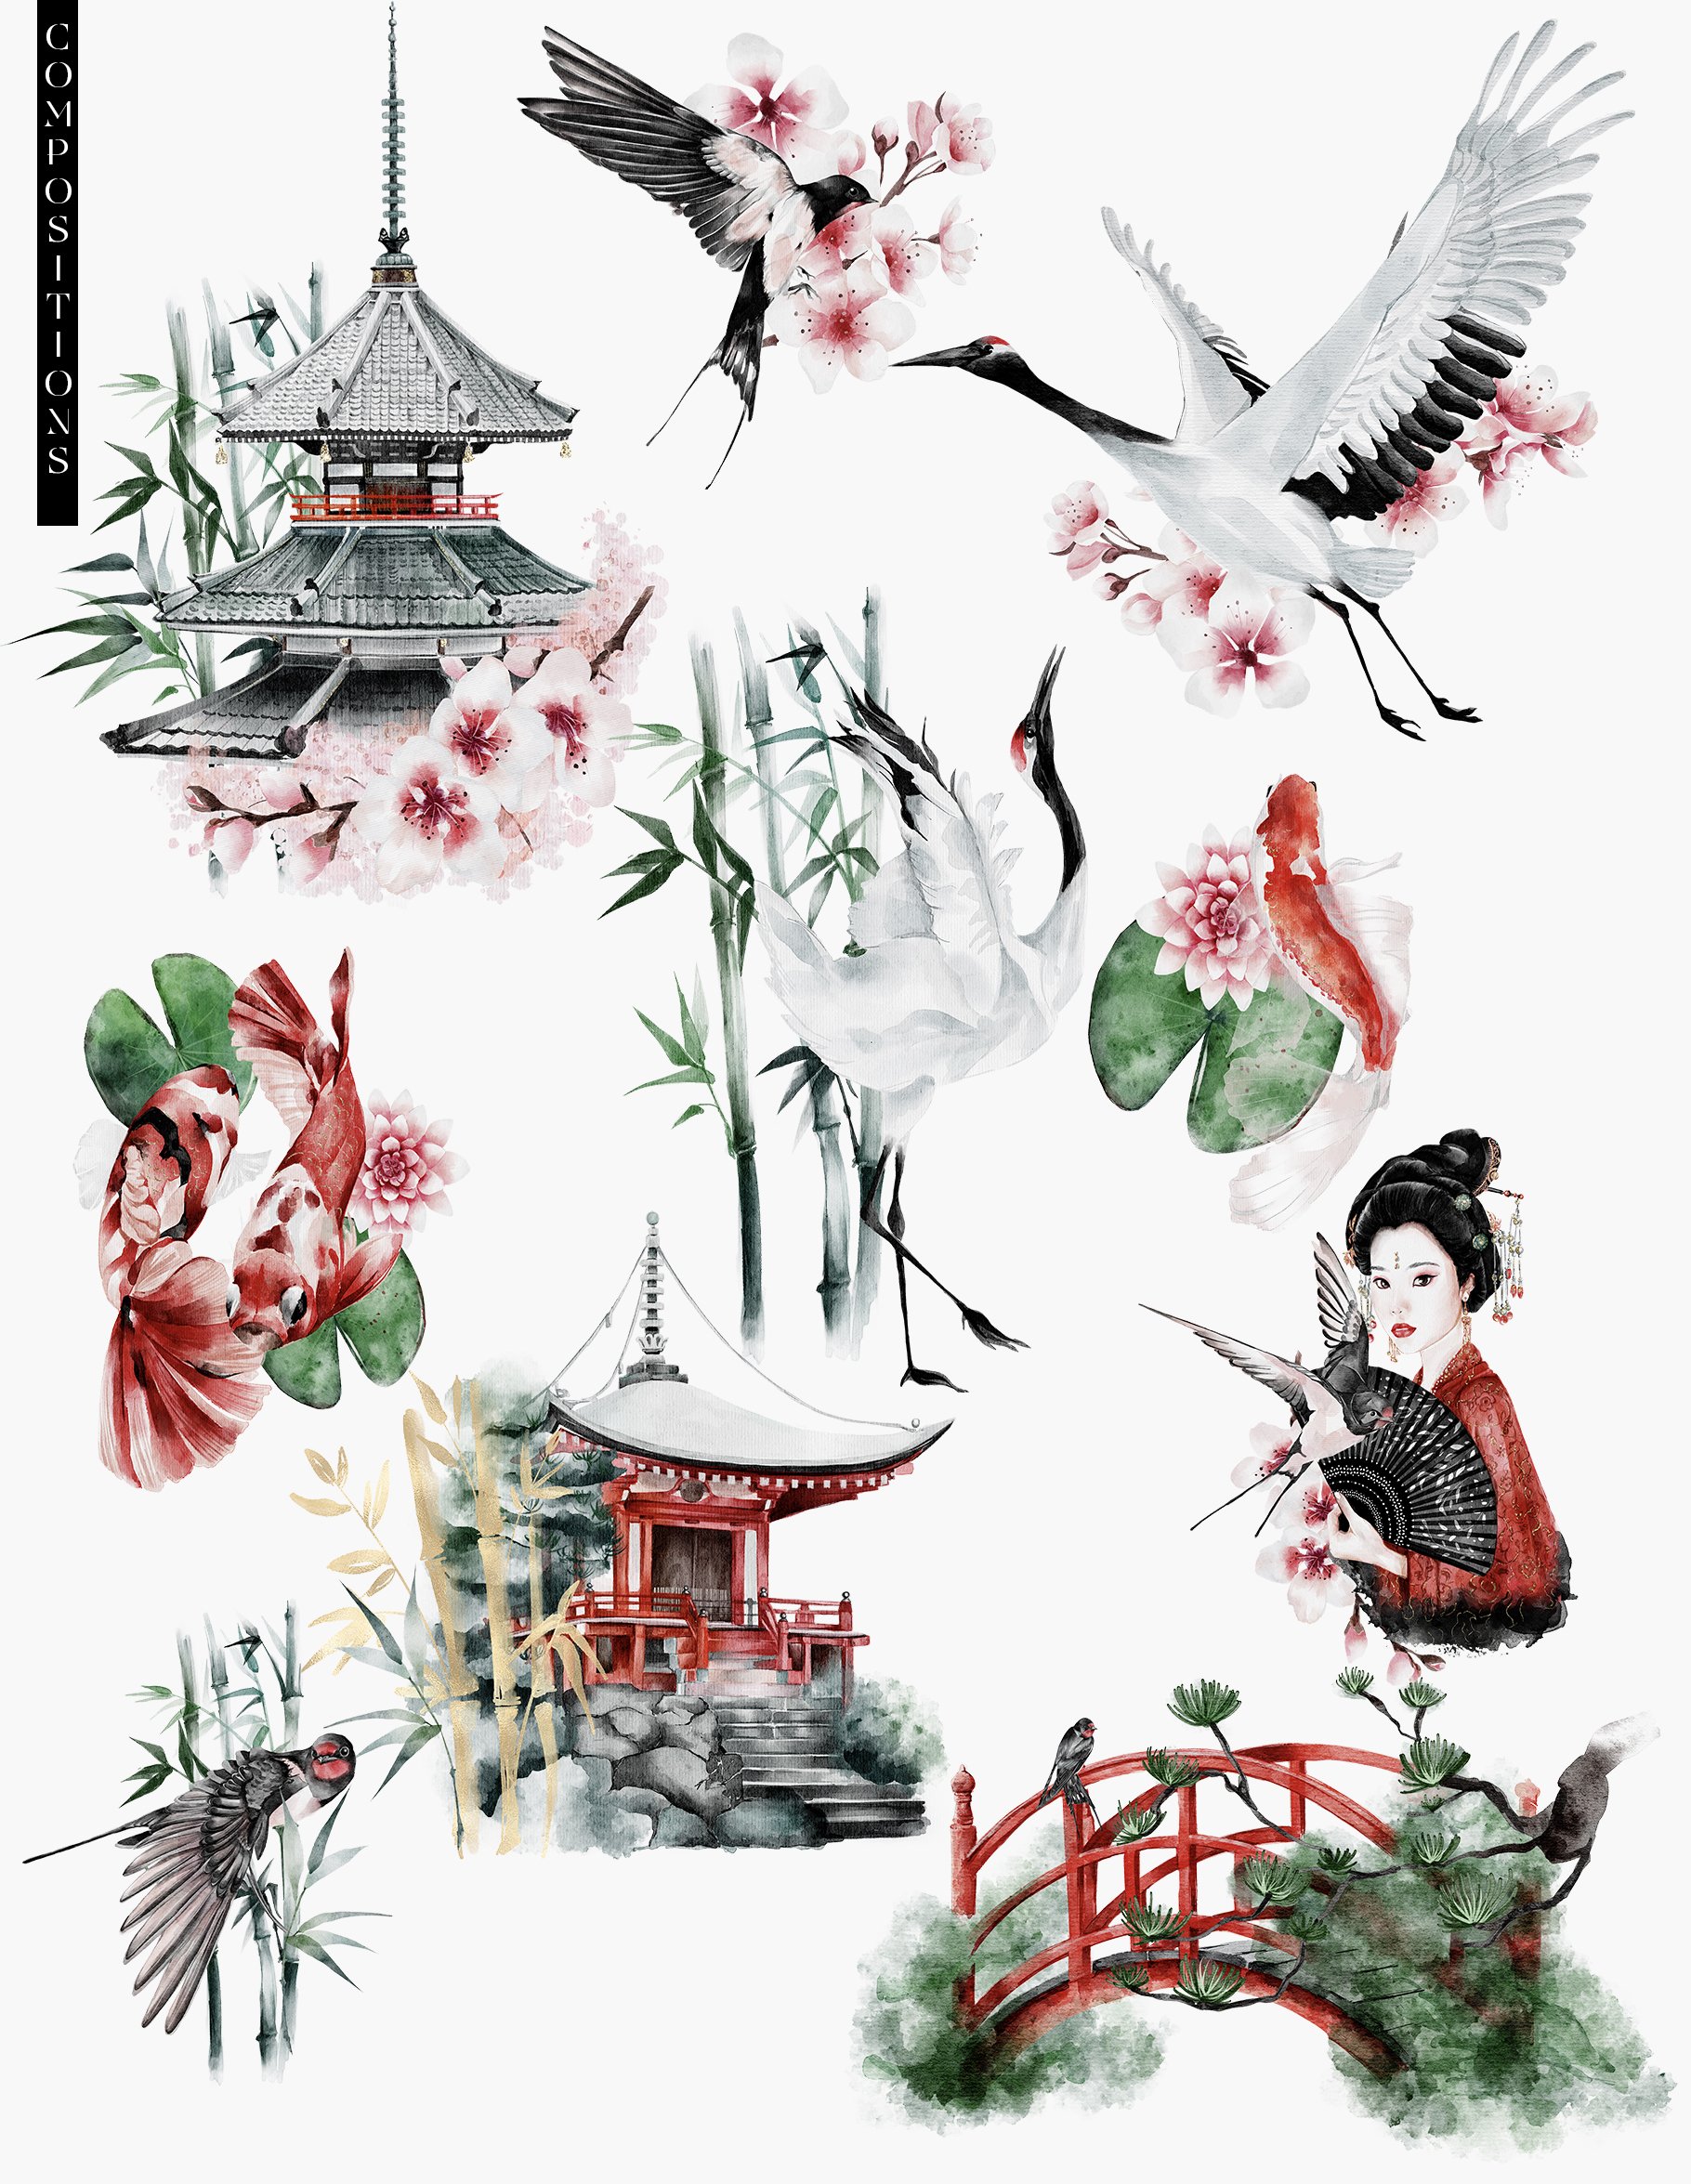 So creative Japanese elements for your illustrations.